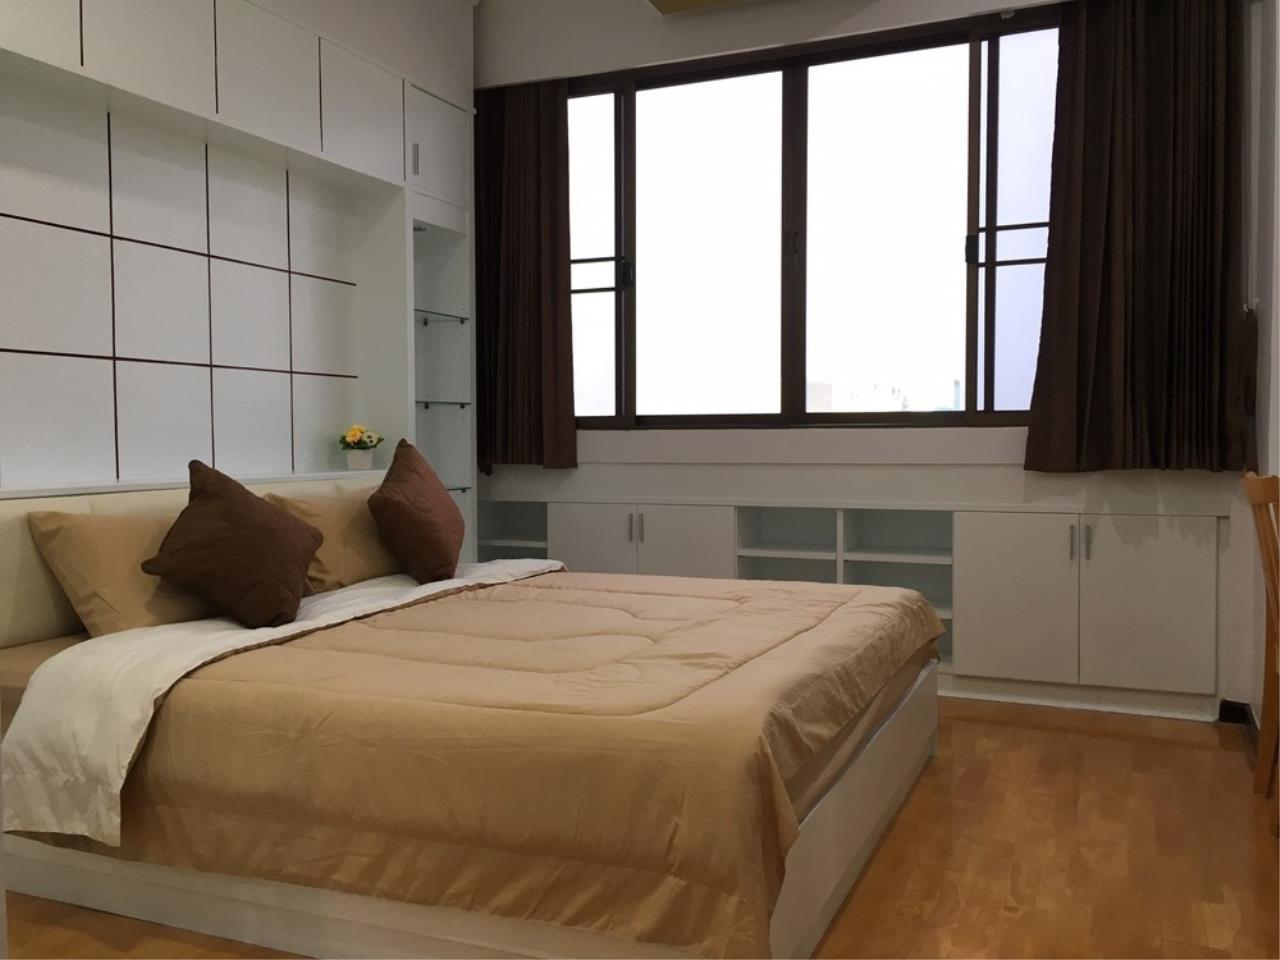 Quality Life Property Agency's S A L E WITH TENANT !! << SUPALAI PLACE >> SOI SUKHUMVIT 39; 2BR 73.50 SQ.M. HIGH FLOOR 2